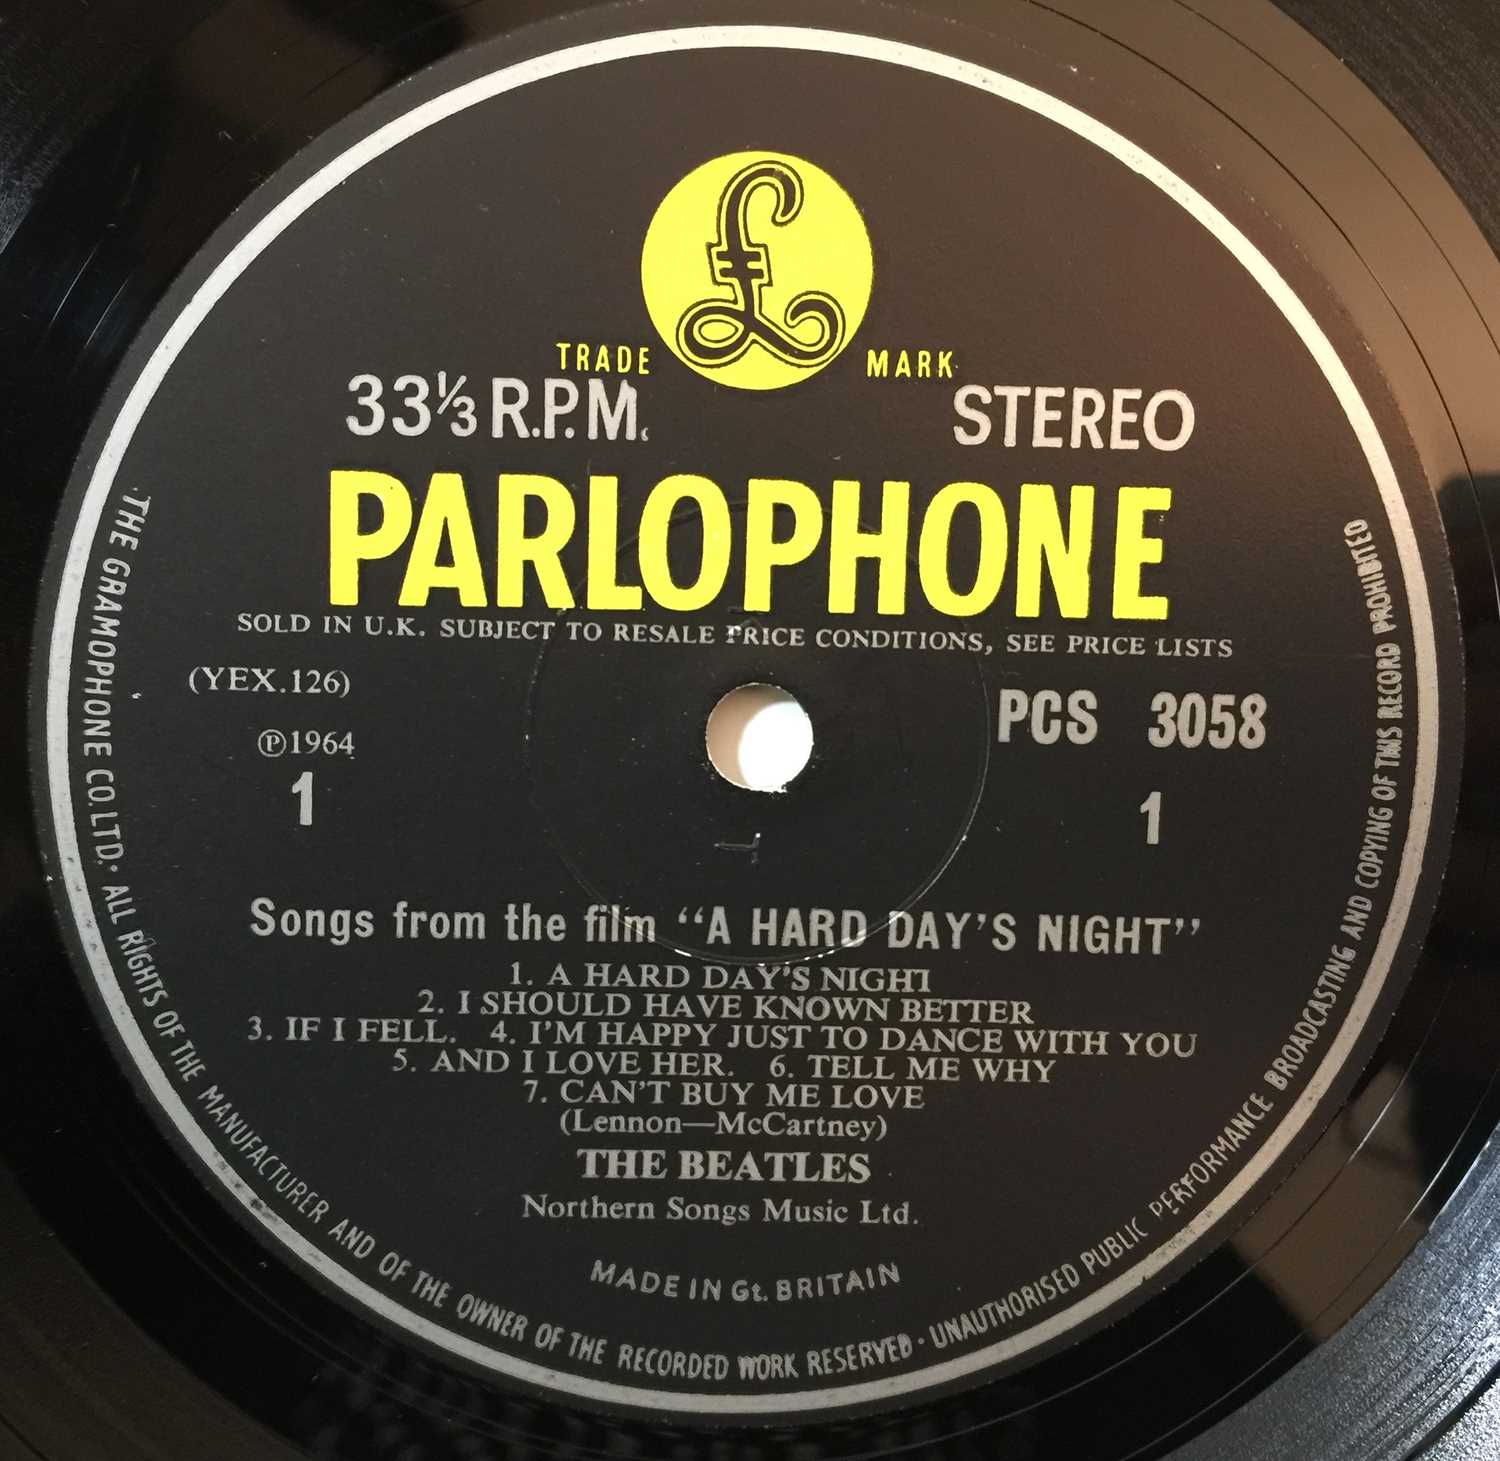 THE BEATLES - A HARD DAY'S NIGHT LPs (1ST AND 2ND UK STEREO PRESSINGS - PCS 3058) - Image 4 of 4